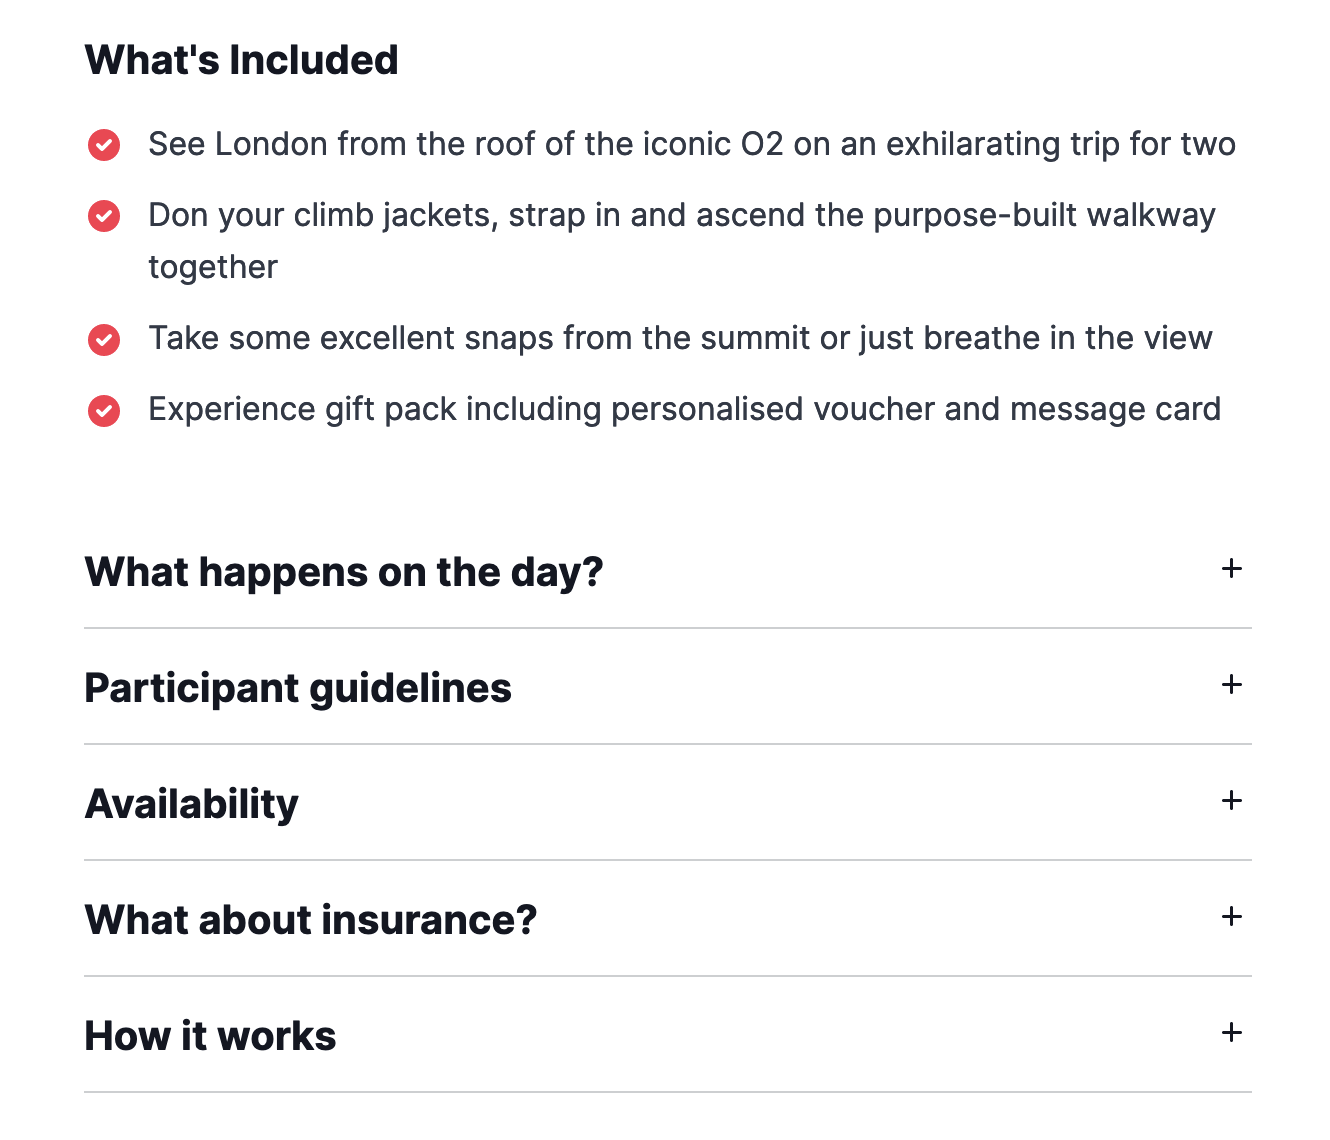 Example of an FAQ section on a Virgin Experience Days product page